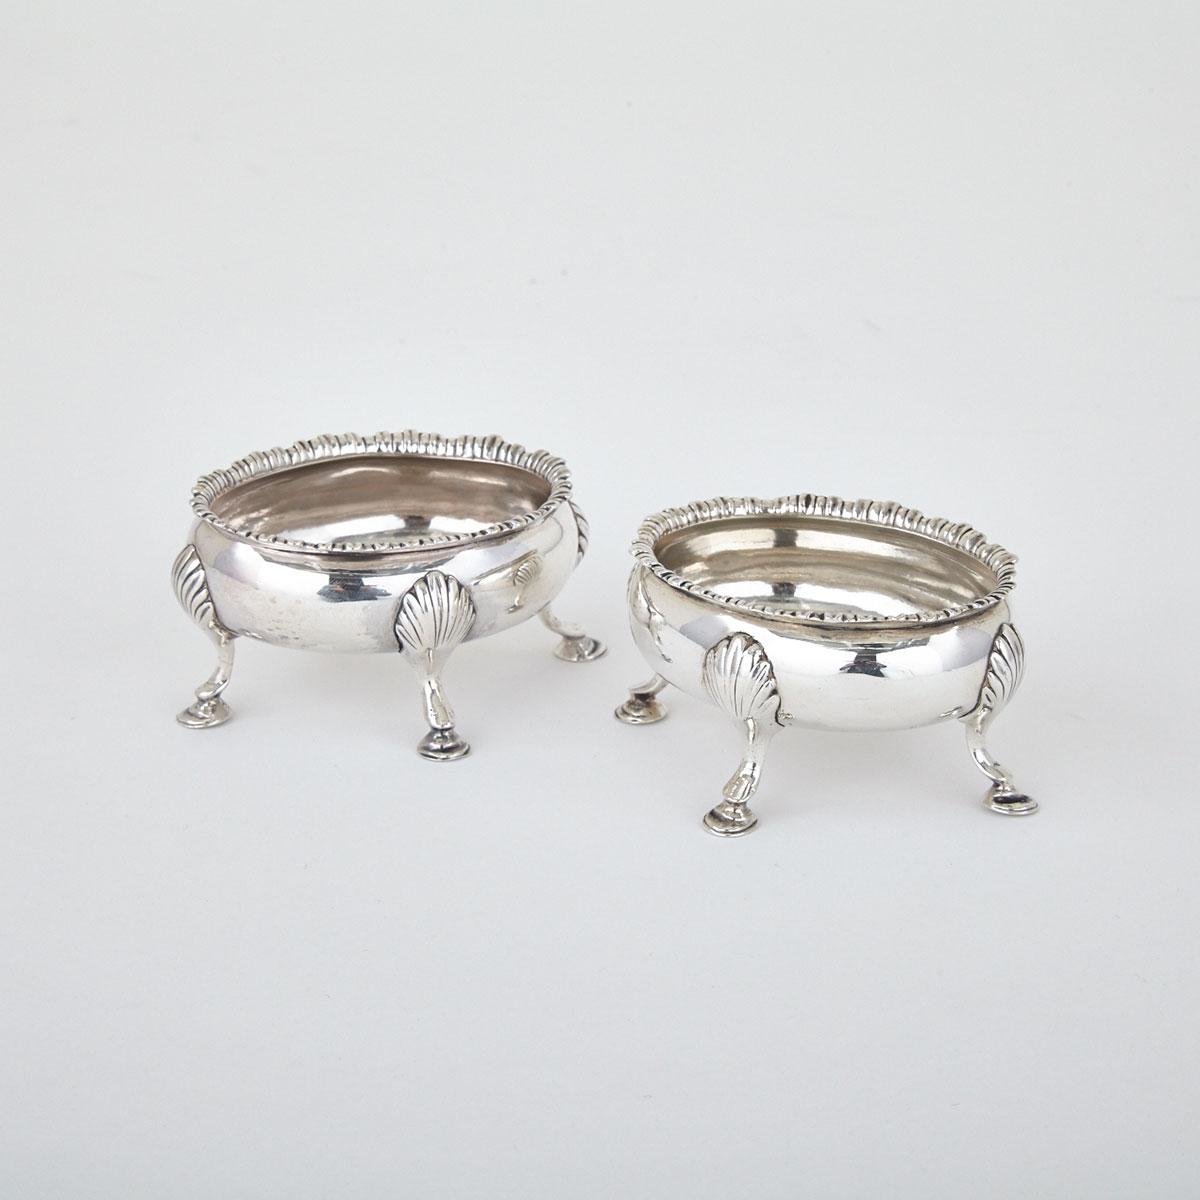 Two George III Silver Oval Salt Cellars, Robert Hennell I, London, 1780 and 1782